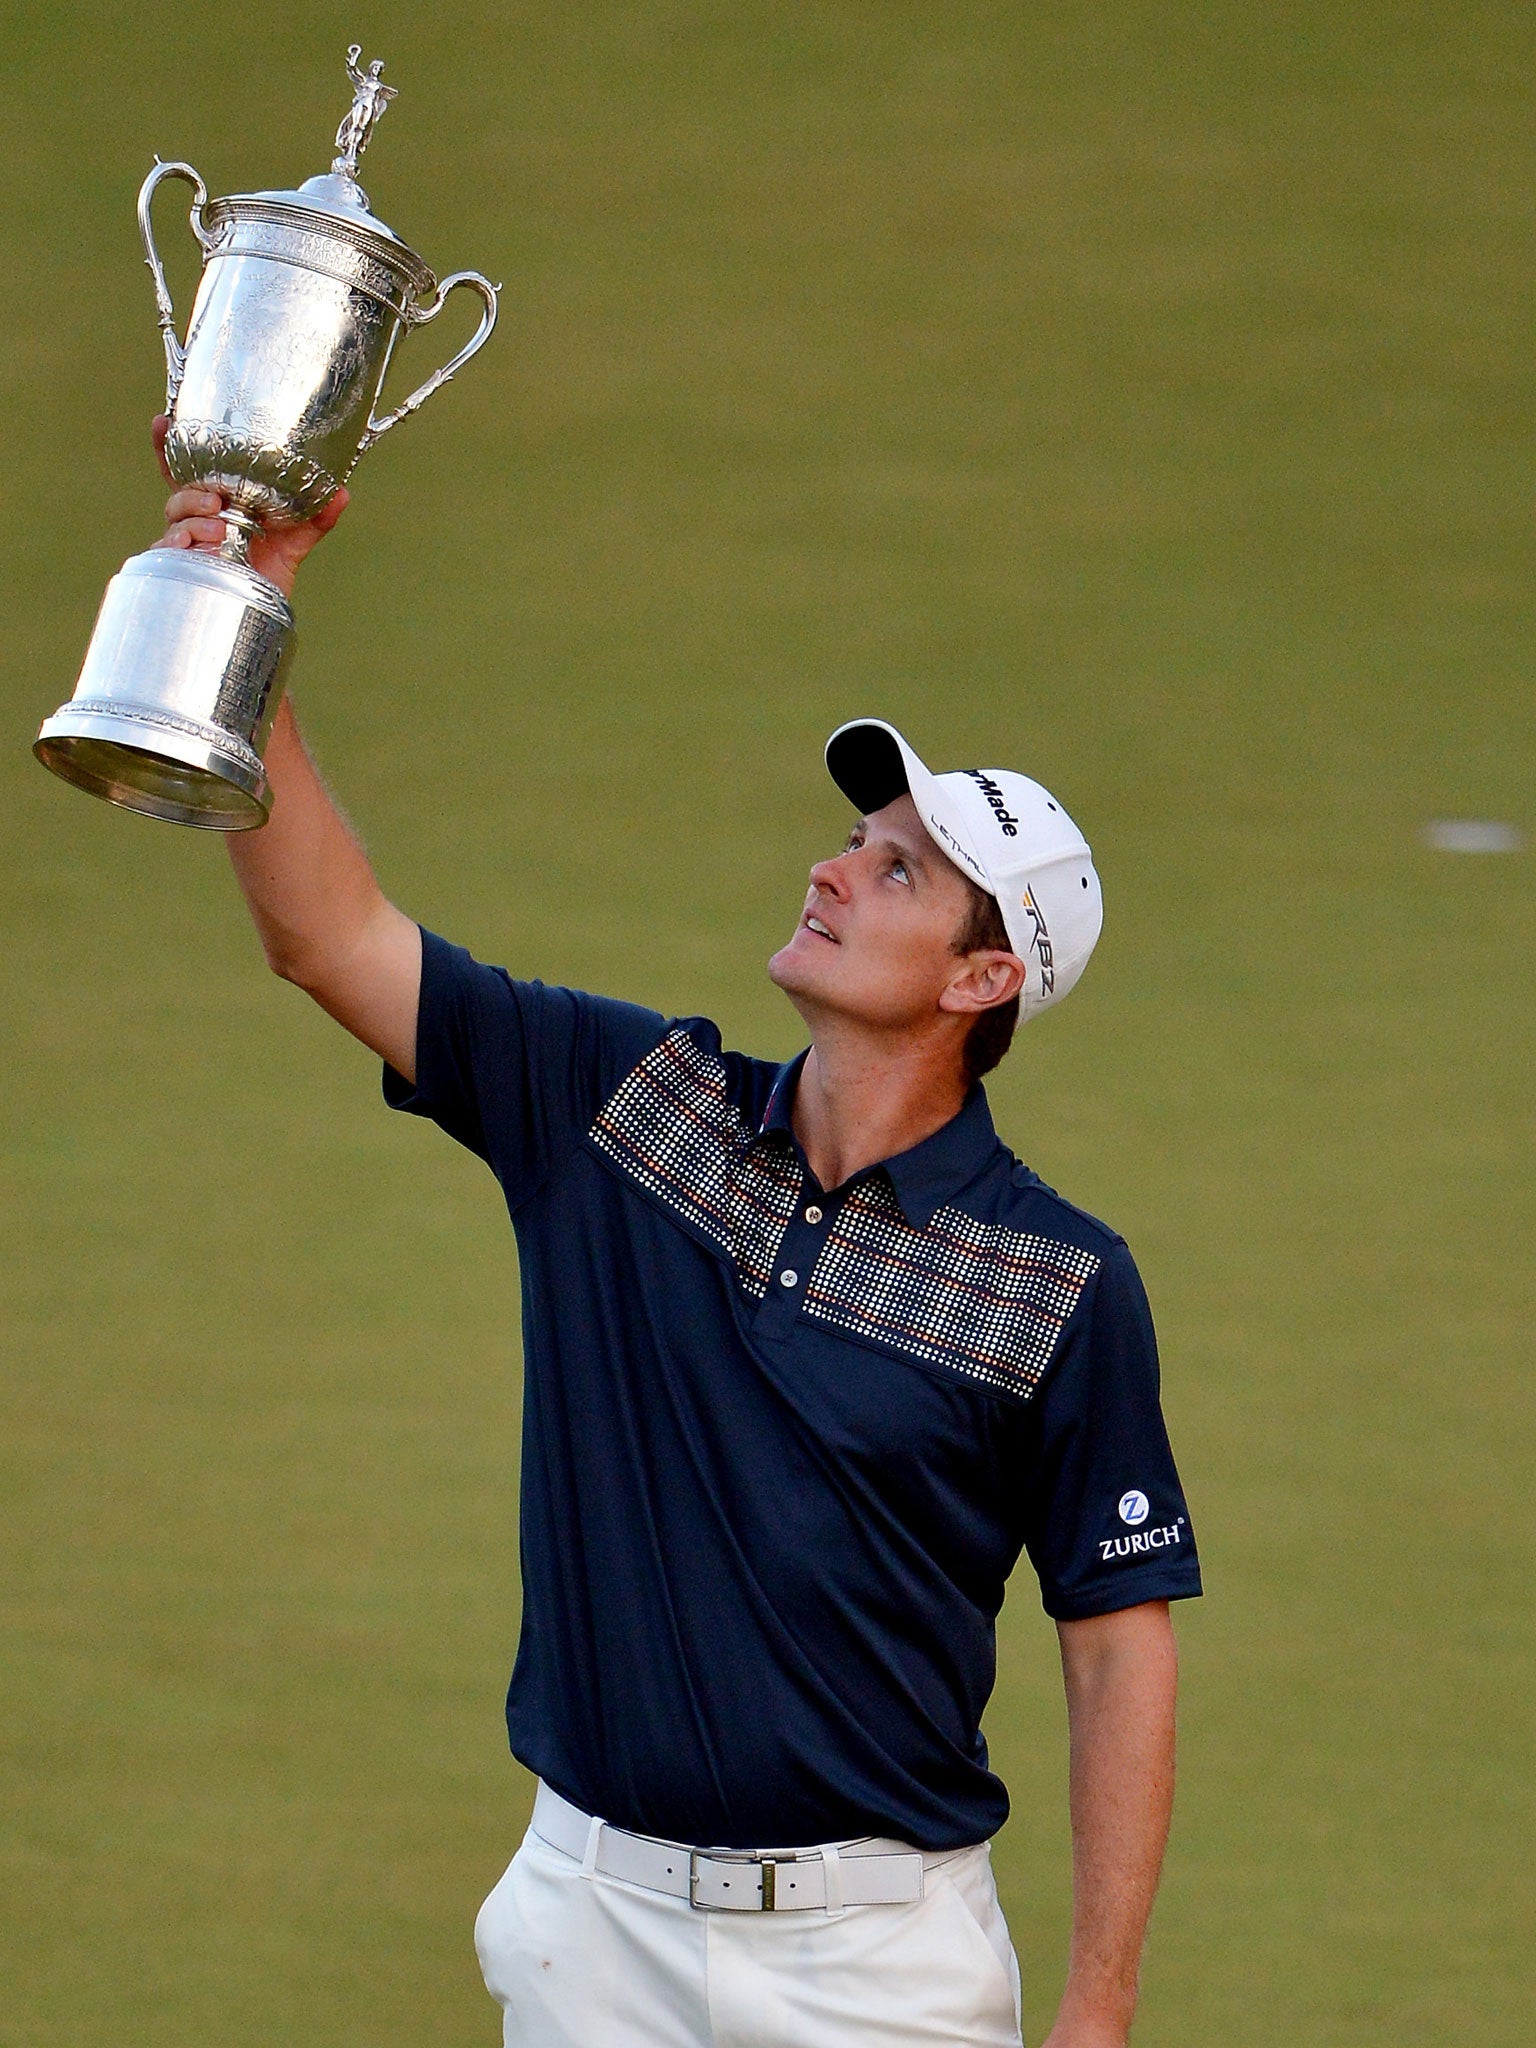 Justin Rose is England's newest sporting hero